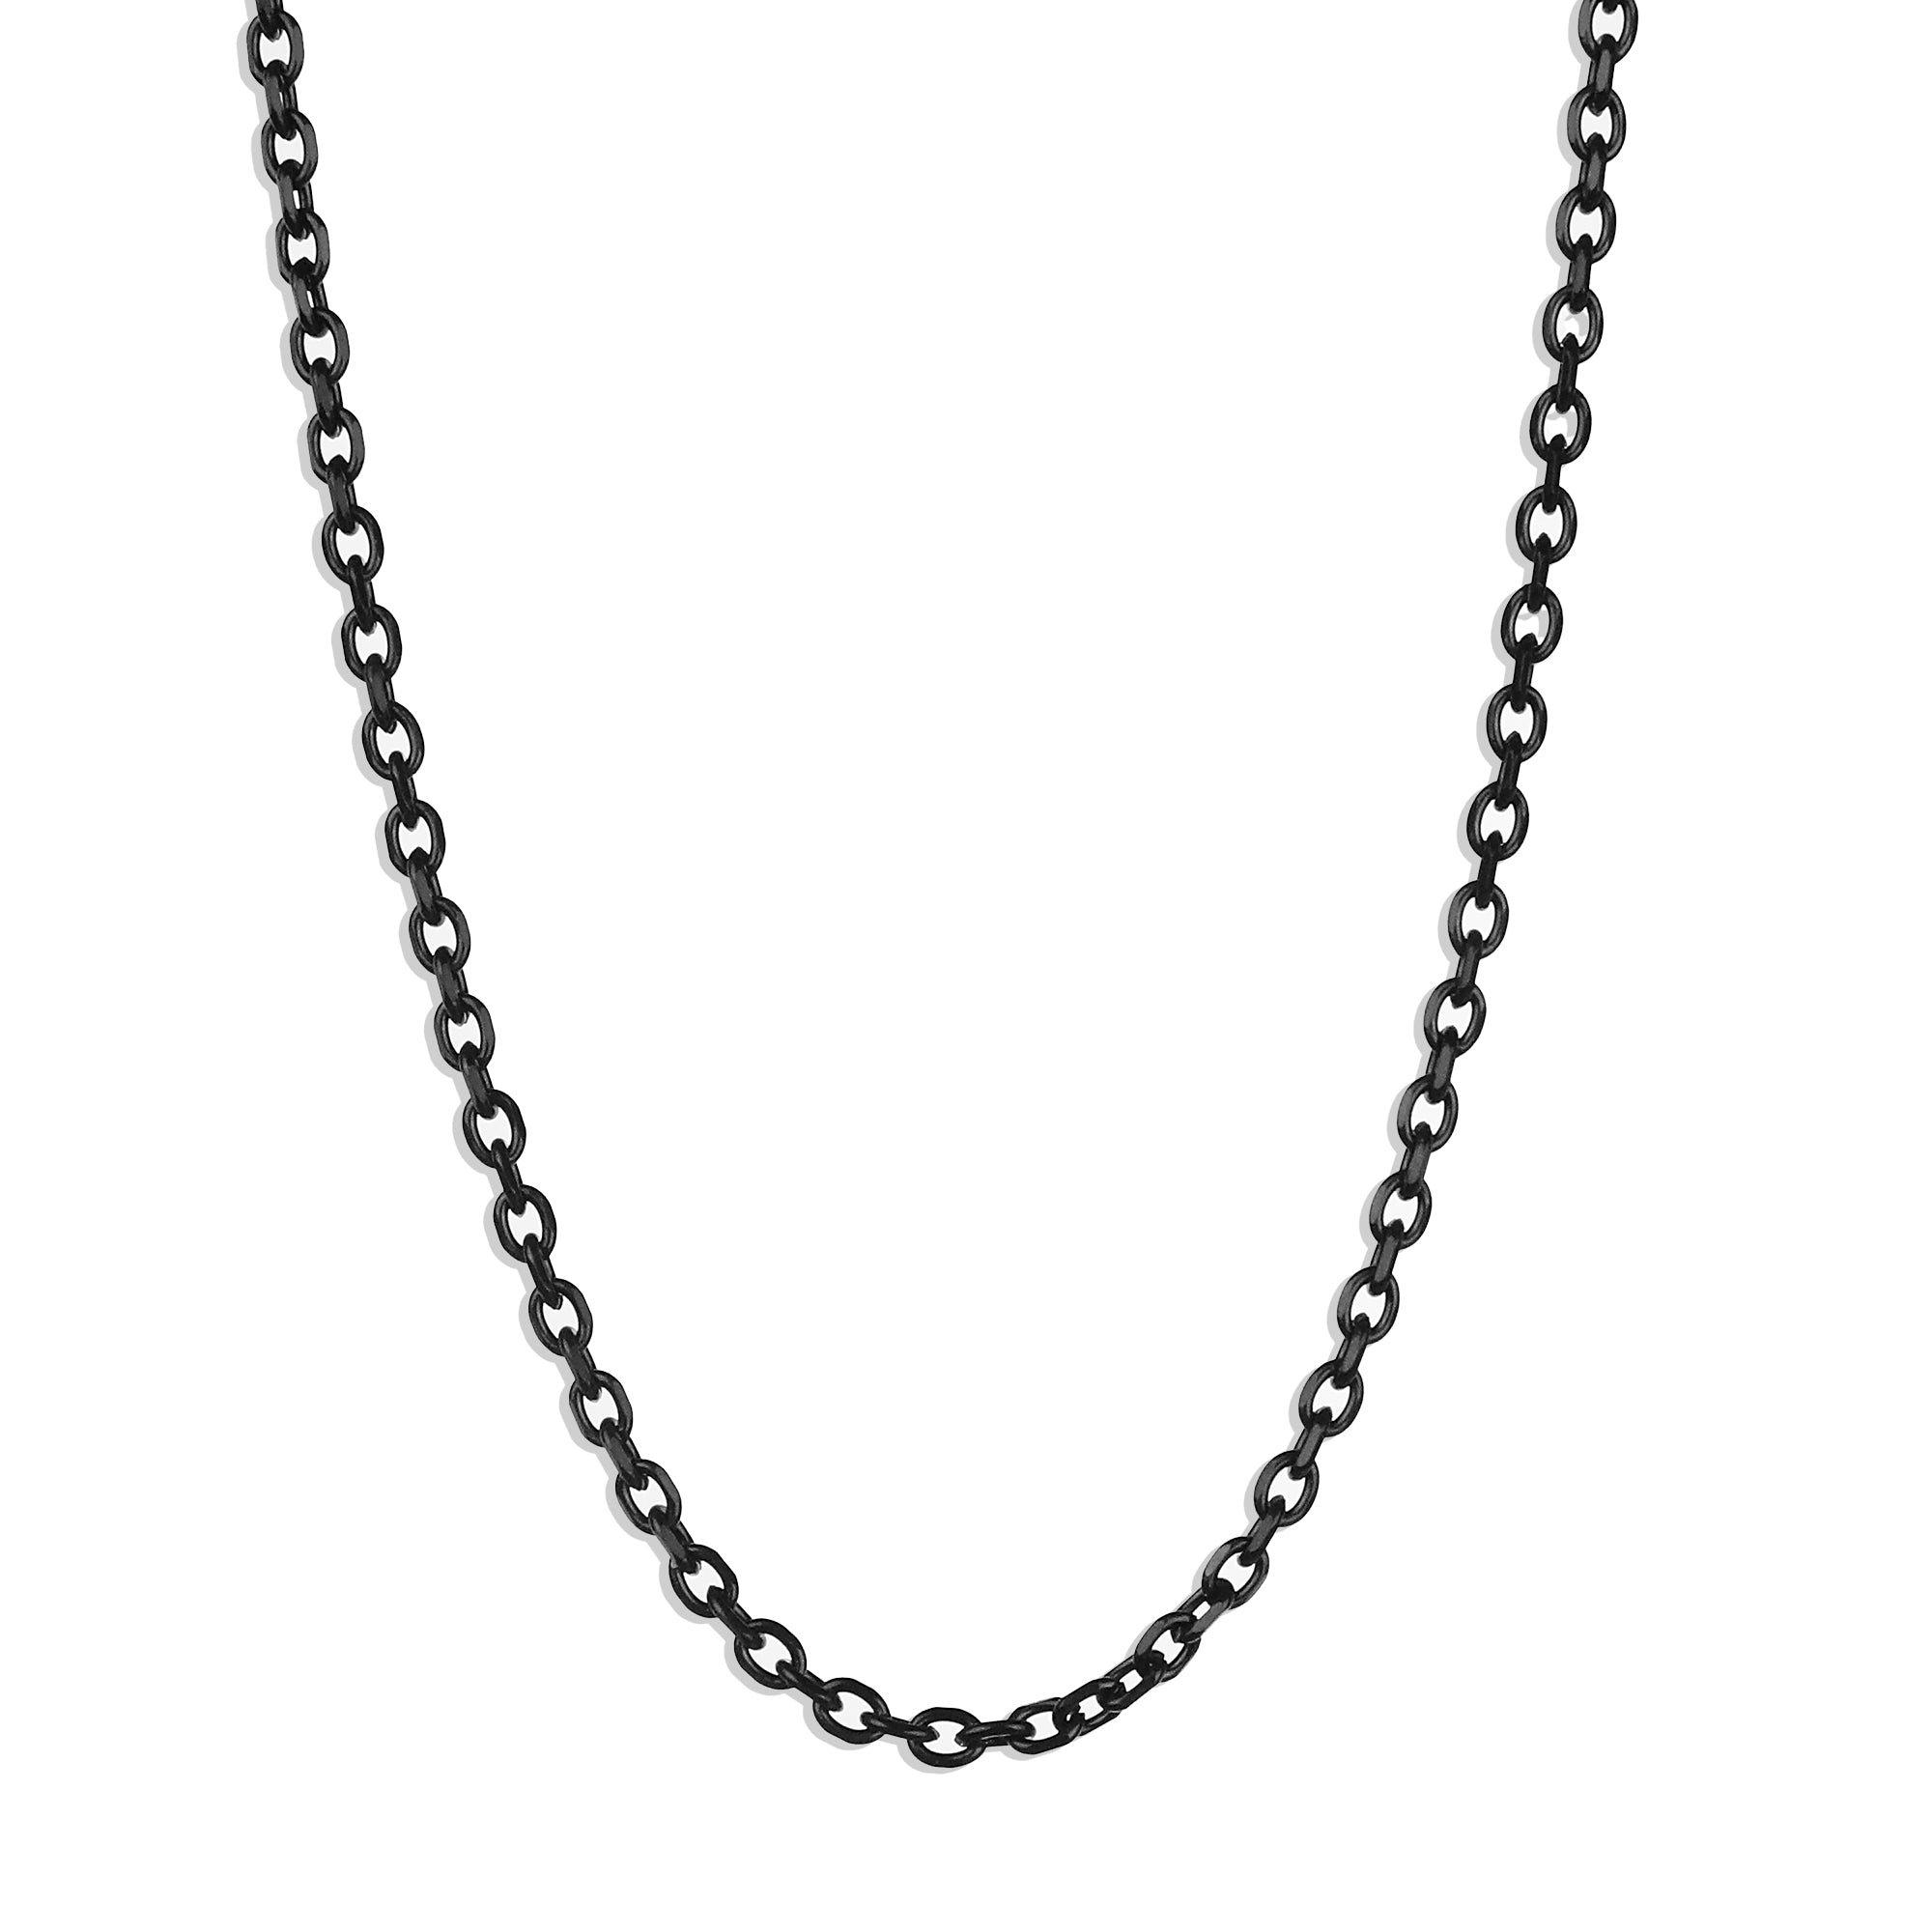 Modern Cable Chain Necklace - Black 3mm